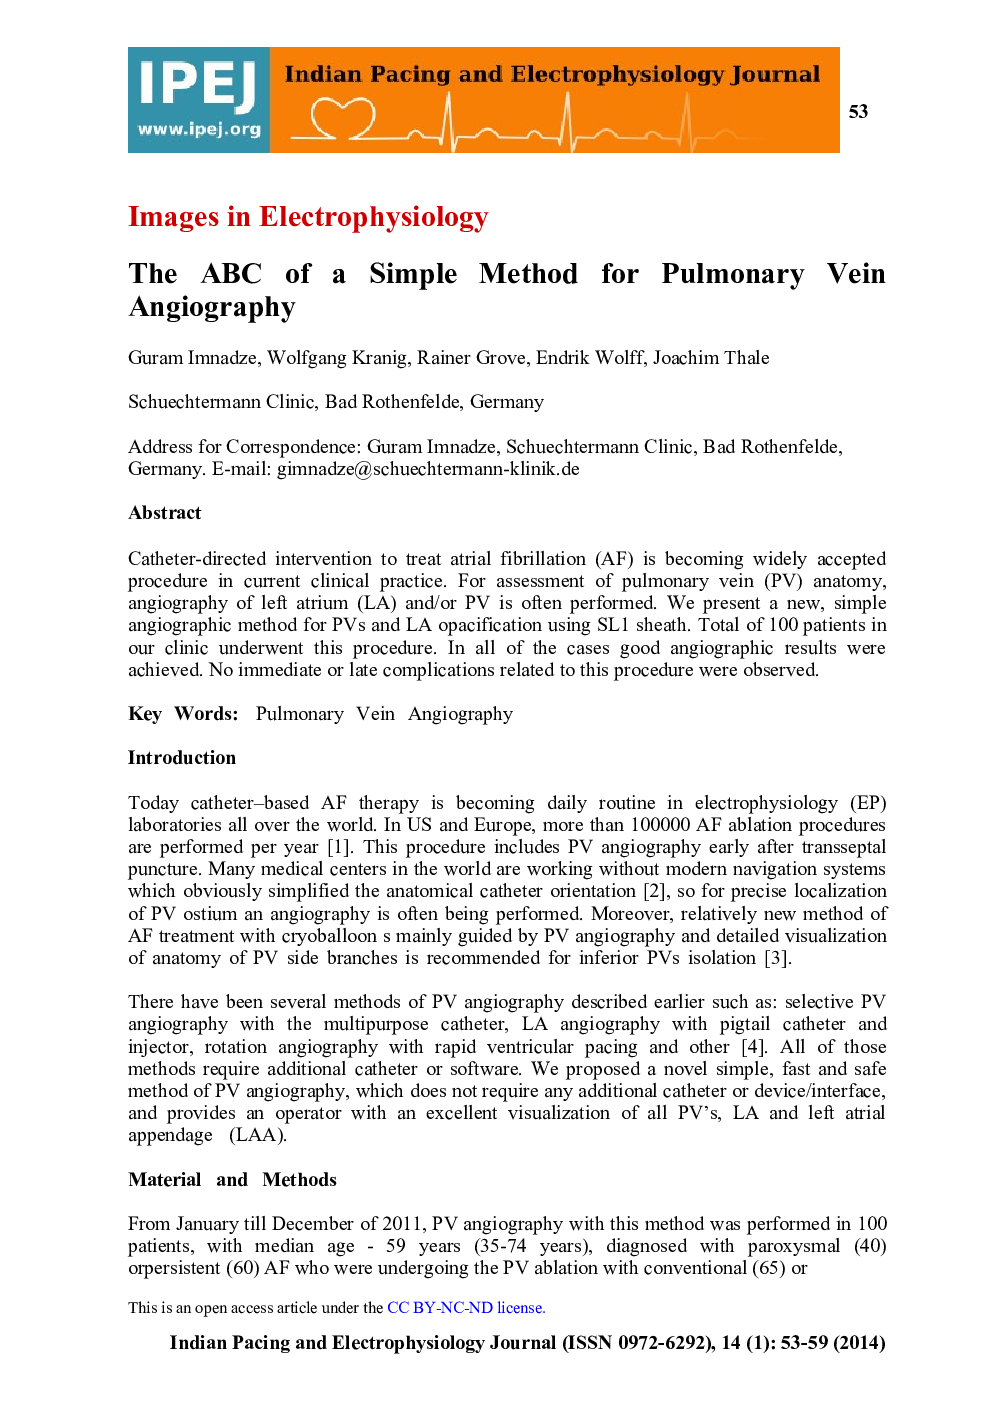 The ABC of a Simple Method for Pulmonary Vein Angiography